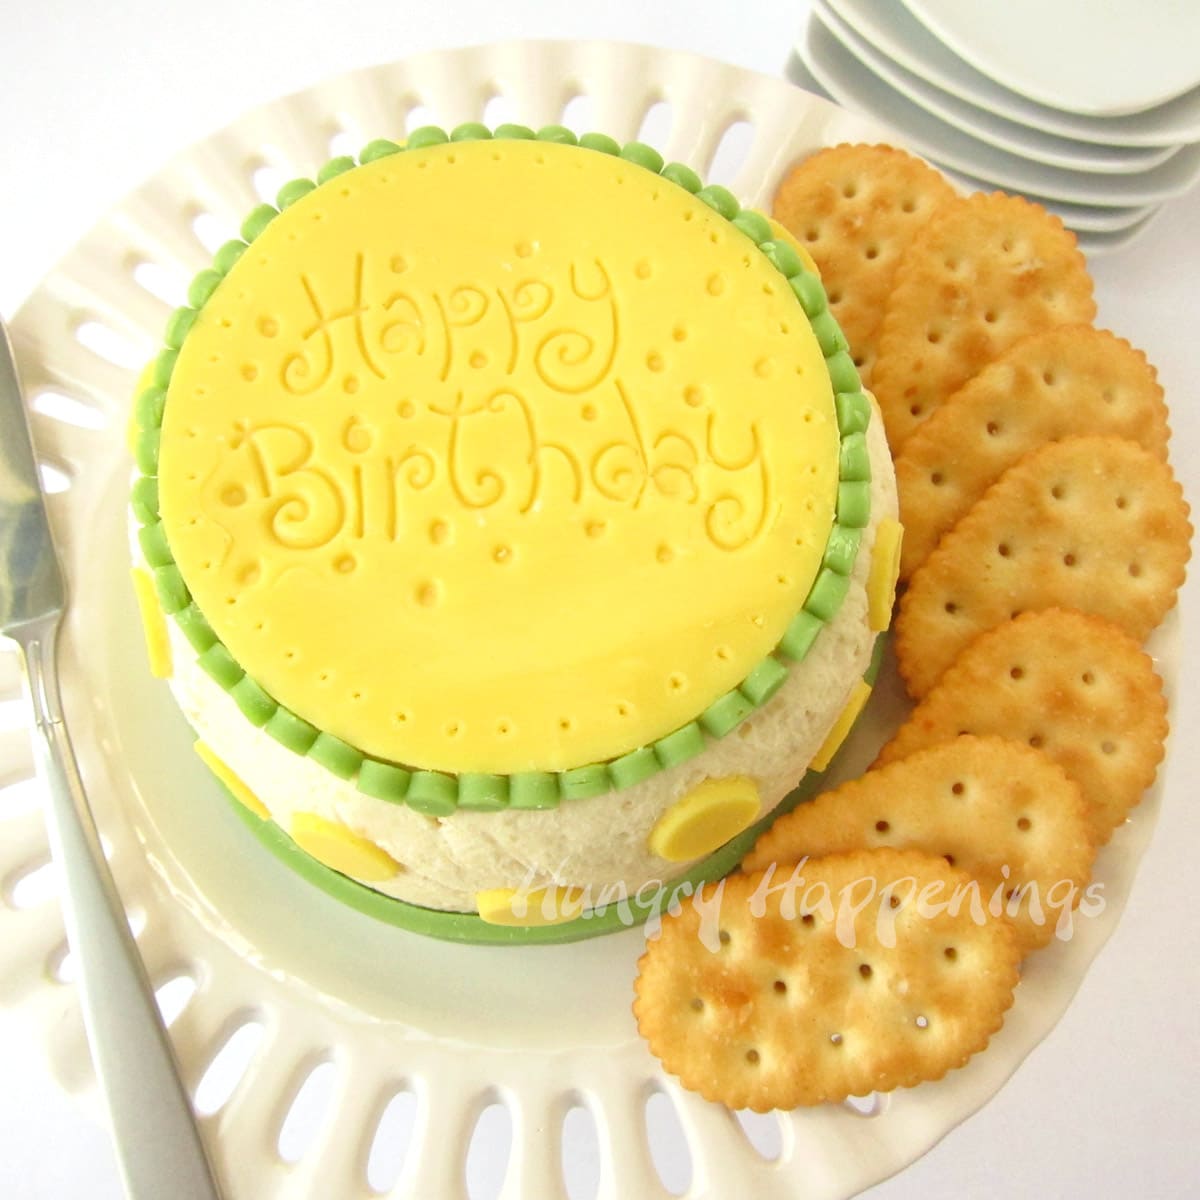 Cheese ball birthday cake decorated with 